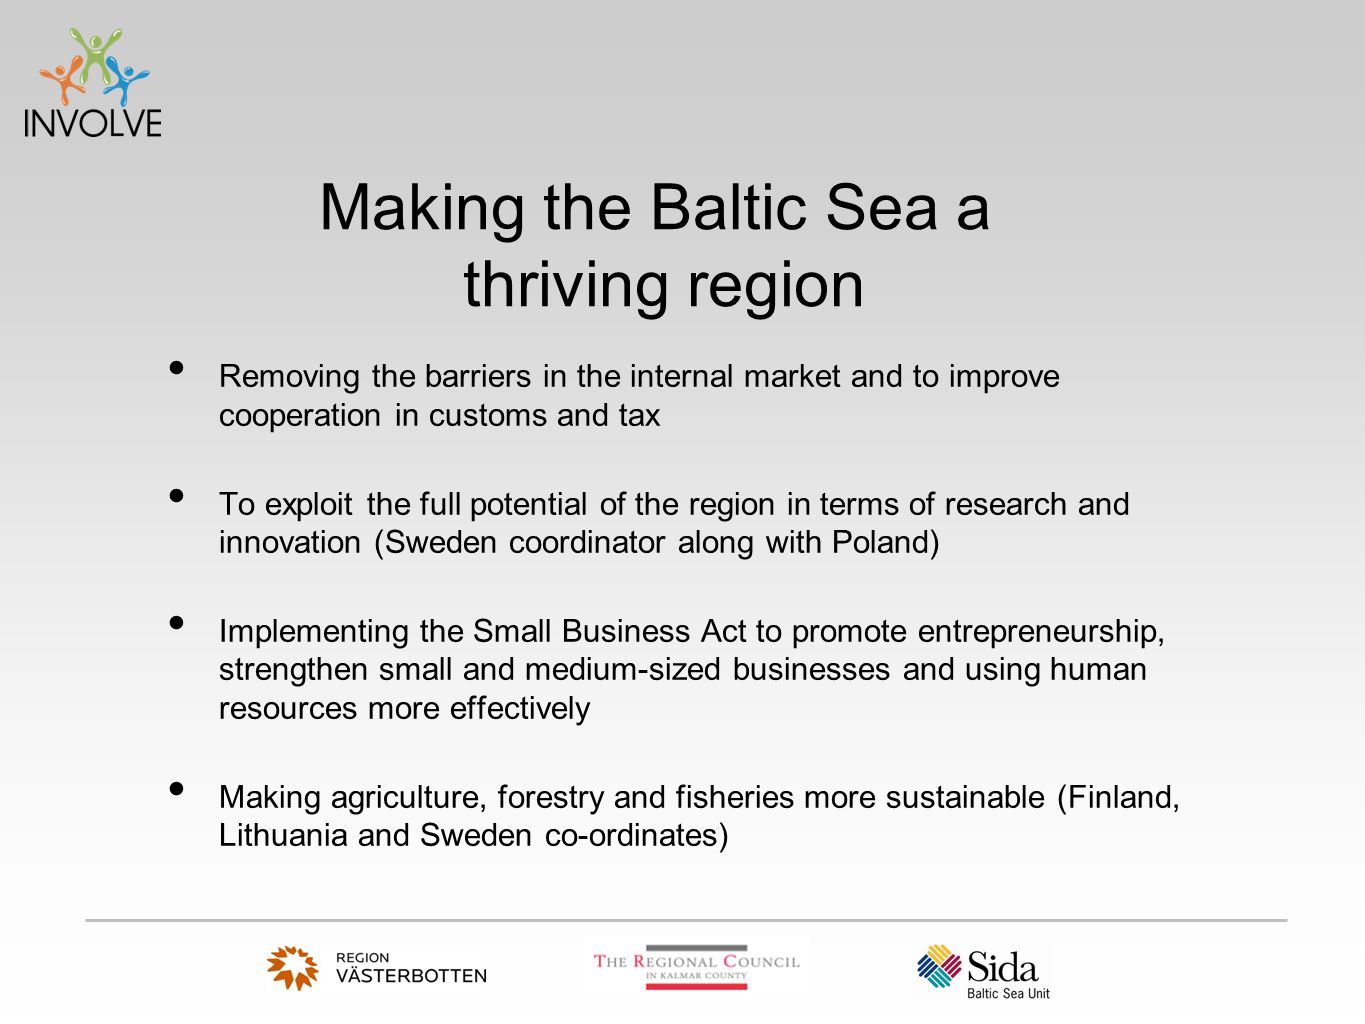 Removing the barriers in the internal market and to improve cooperation in customs and tax To exploit the full potential of the region in terms of research and innovation (Sweden coordinator along with Poland) Implementing the Small Business Act to promote entrepreneurship, strengthen small and medium-sized businesses and using human resources more effectively Making agriculture, forestry and fisheries more sustainable (Finland, Lithuania and Sweden co-ordinates) Making the Baltic Sea a thriving region